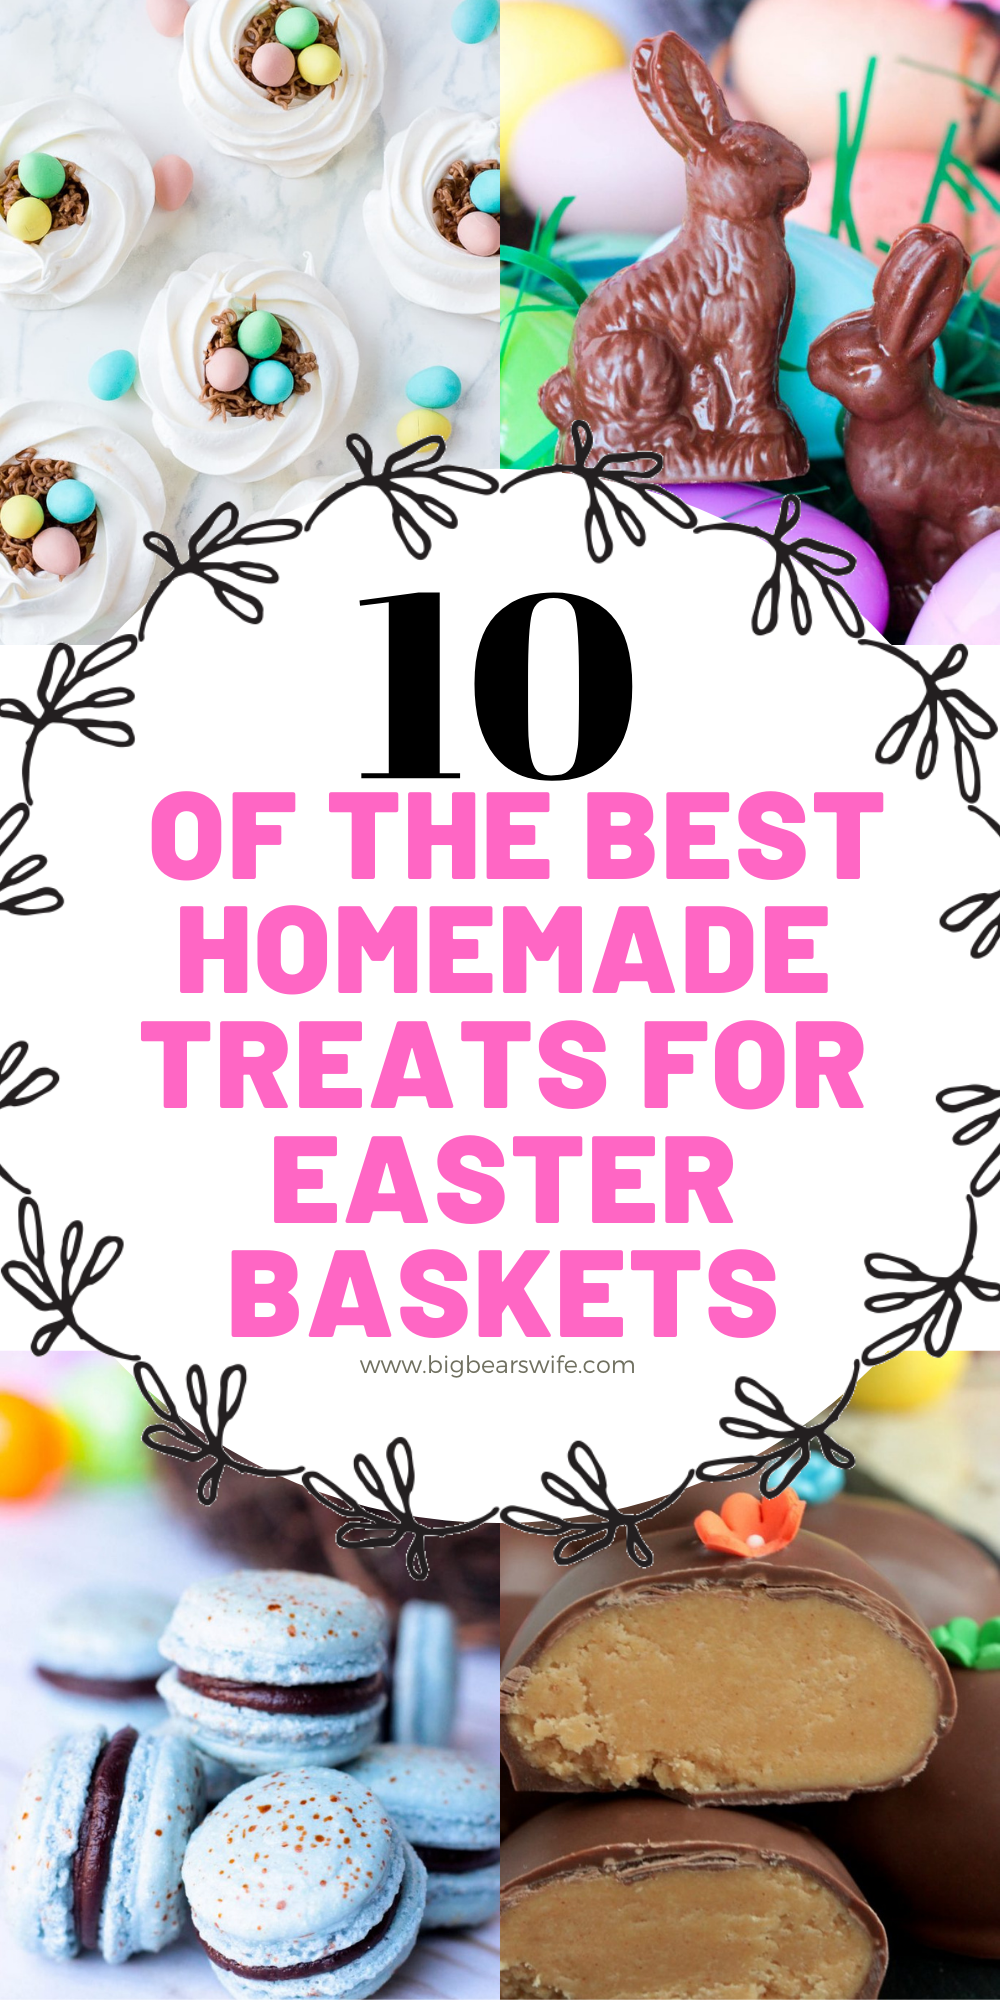 If you're filling Easter baskets for your kids or grandchildren this year or maybe just helping the Easter Bunny with some ideas, you'll love these Homemade Easter Basket treats! Sure, store bought Easter surprises are neat but homemade treats are even better! Fill your little one's Easter basket with 10 of the best Homemade Treats for Easter Baskets this year! 

 via @bigbearswife